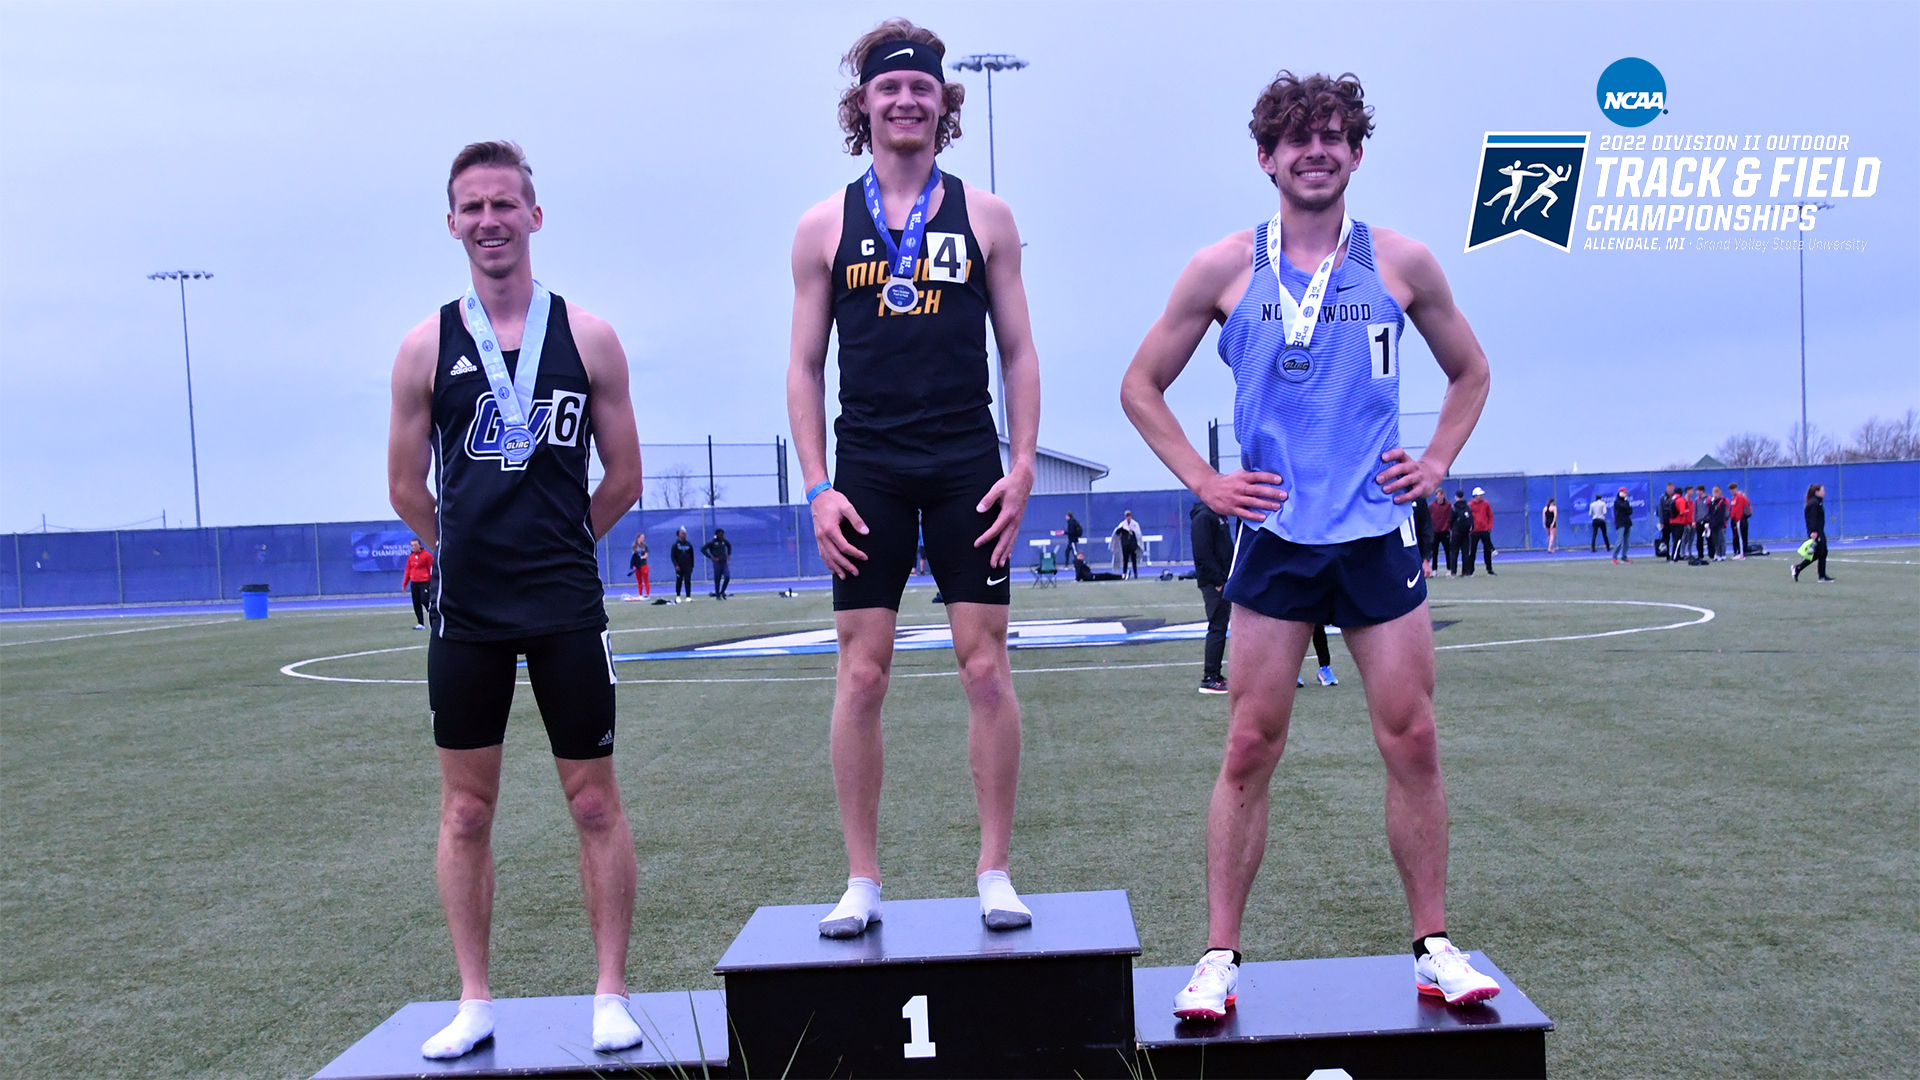 Sayen qualifies for NCAA Division II Outdoor Track & Field Championships